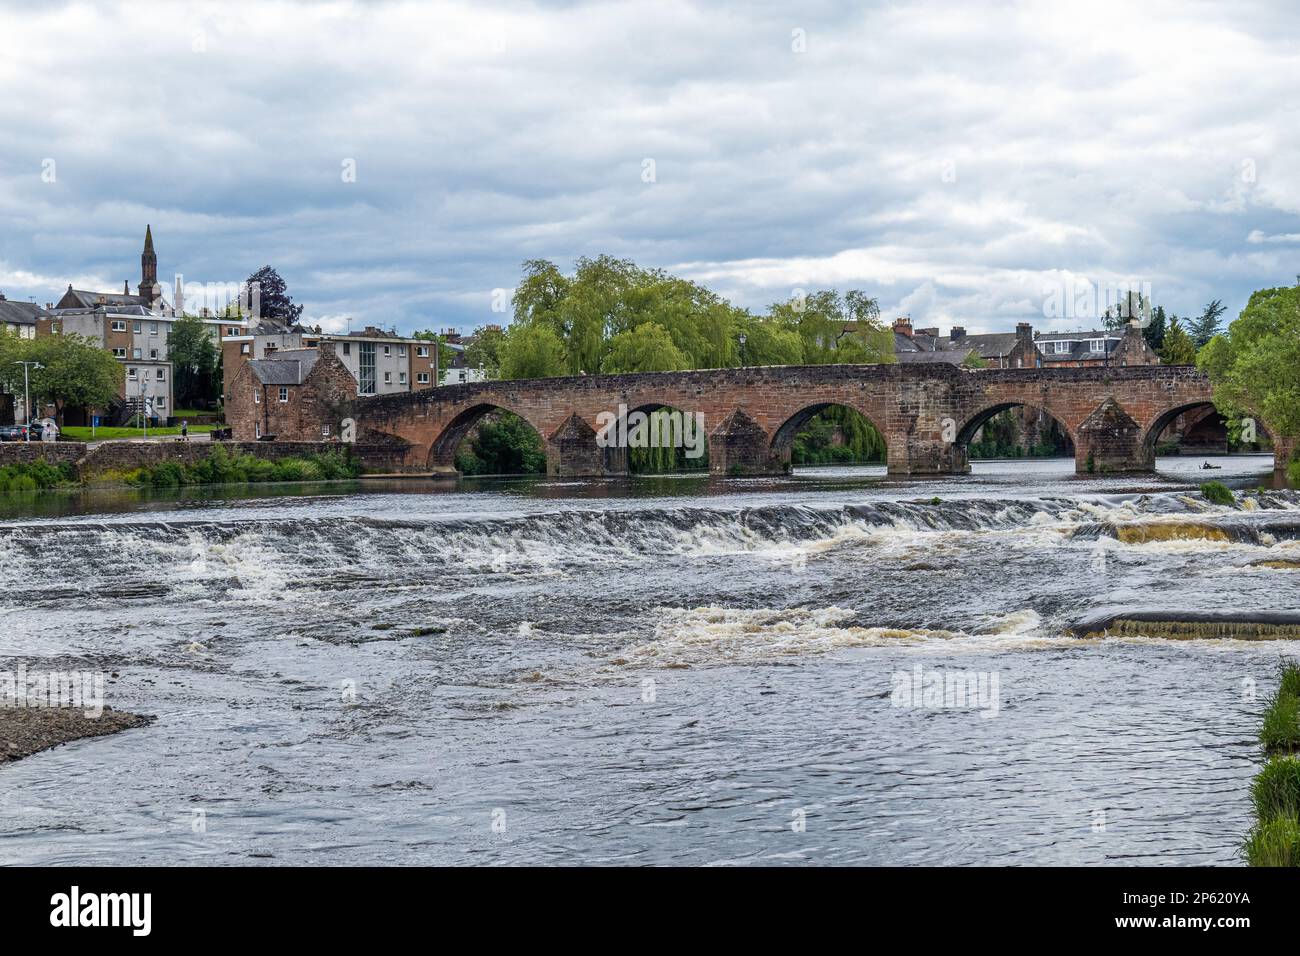 Bridge over River Nith, Dumfries, Dumfries and Galloway, Scotland Stock Photo